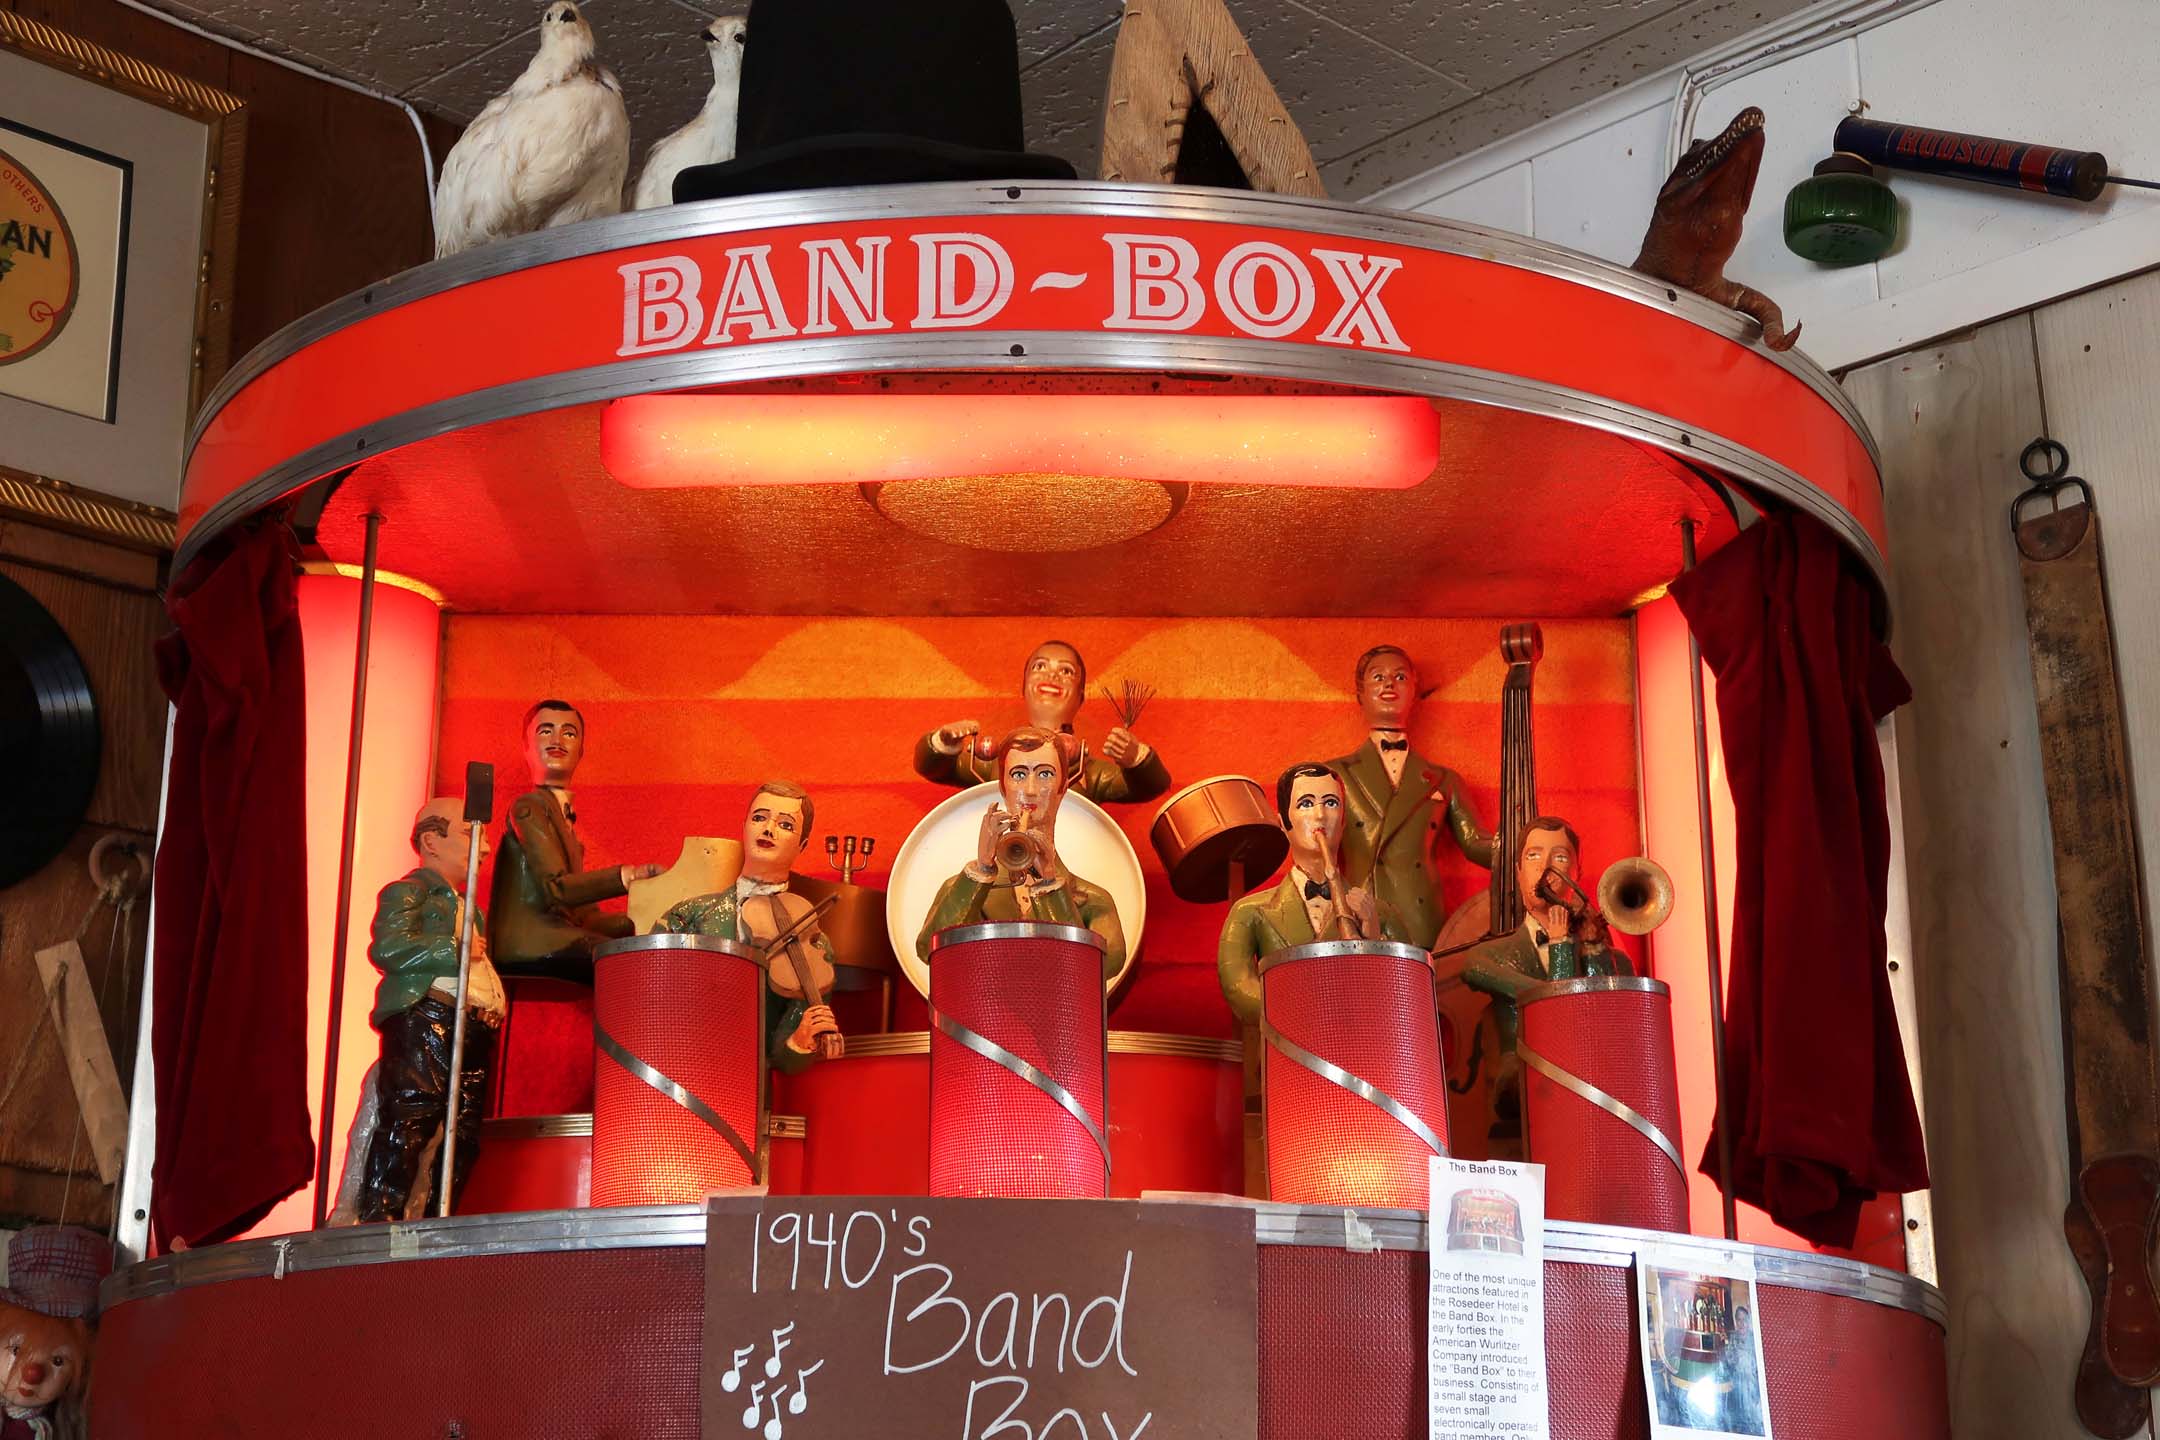 Don't miss the Band Box at the Last Chance Saloon